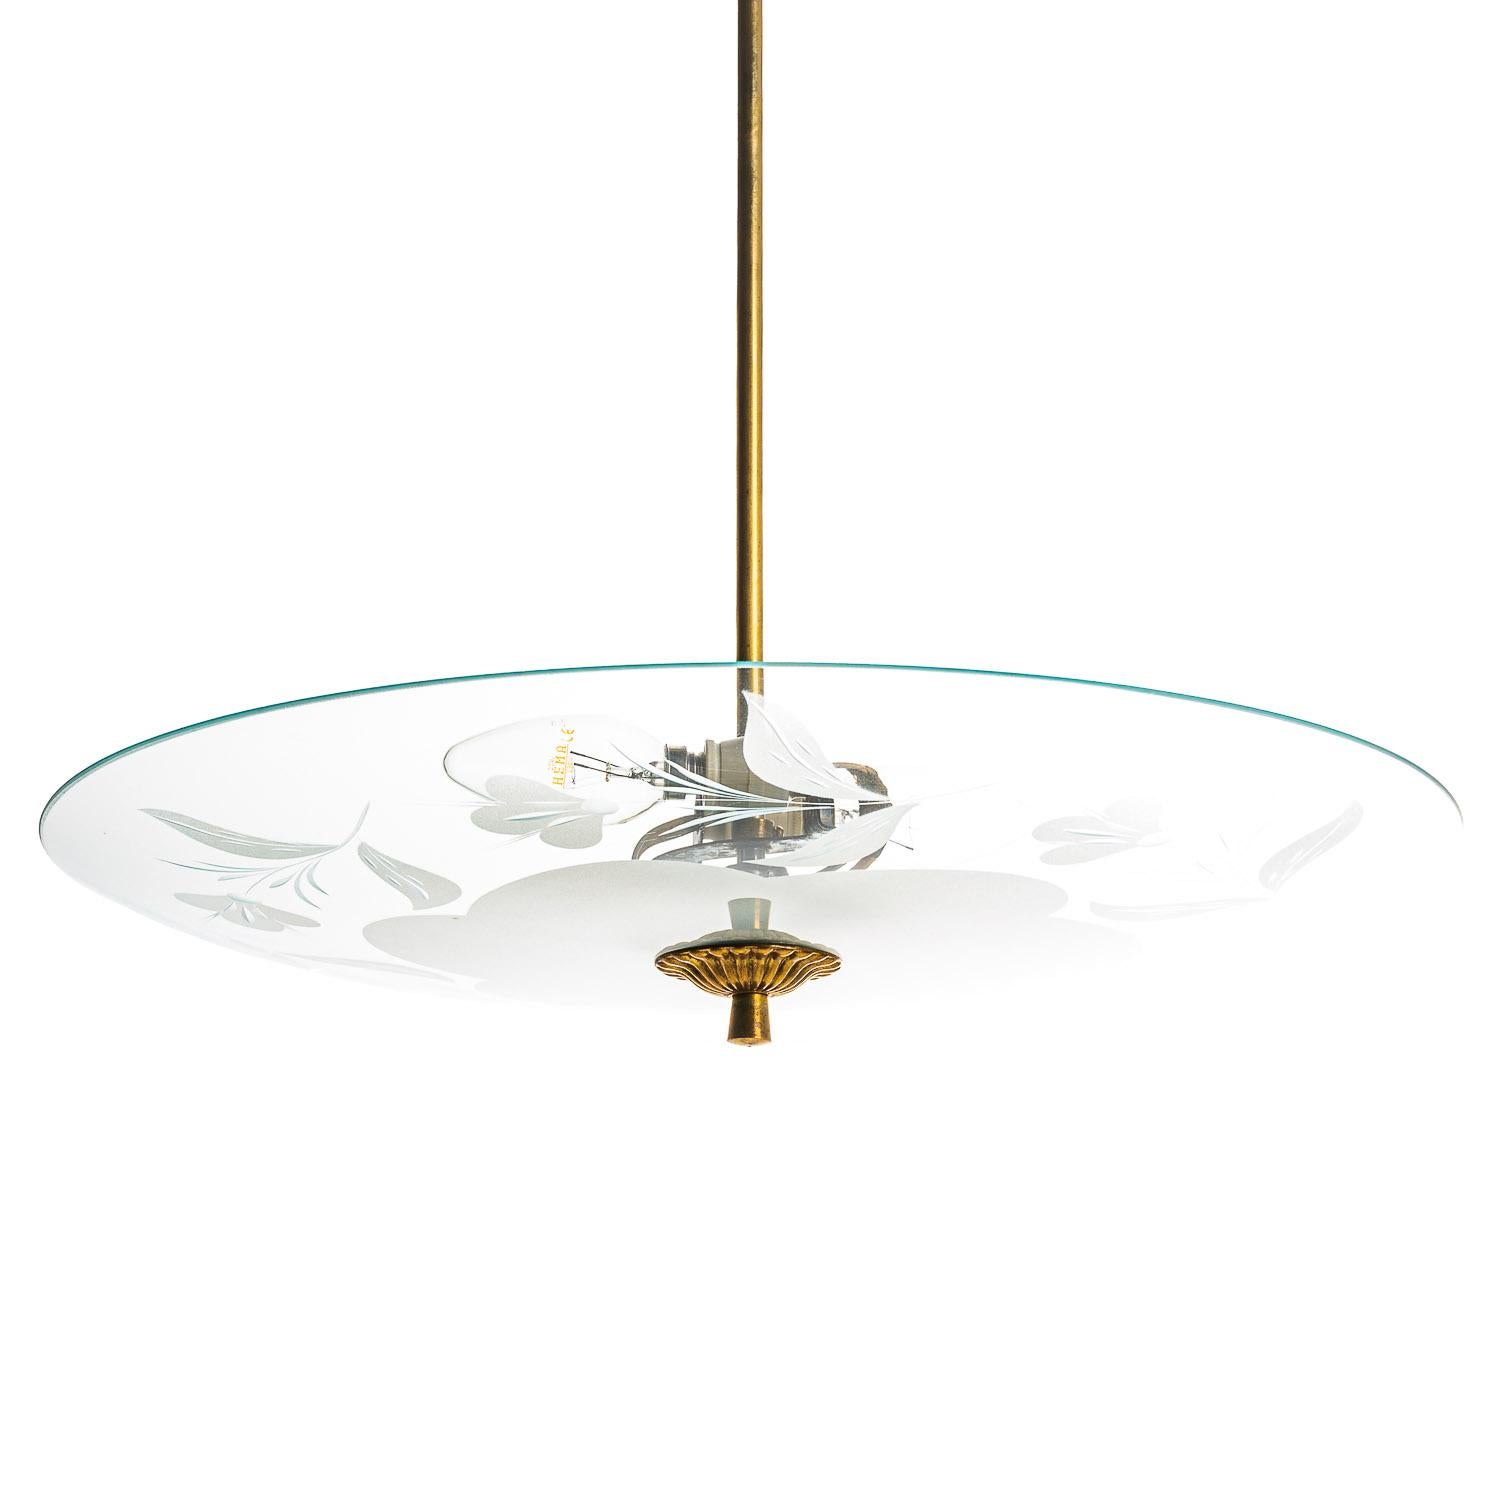 This stylish pendant lamp is decorated with a delicate floral pattern engraved onto a frosted satin glass reflector. In the centre are two electrical E27 sockets. This unique feature creates a beautiful soft-lighting effect.